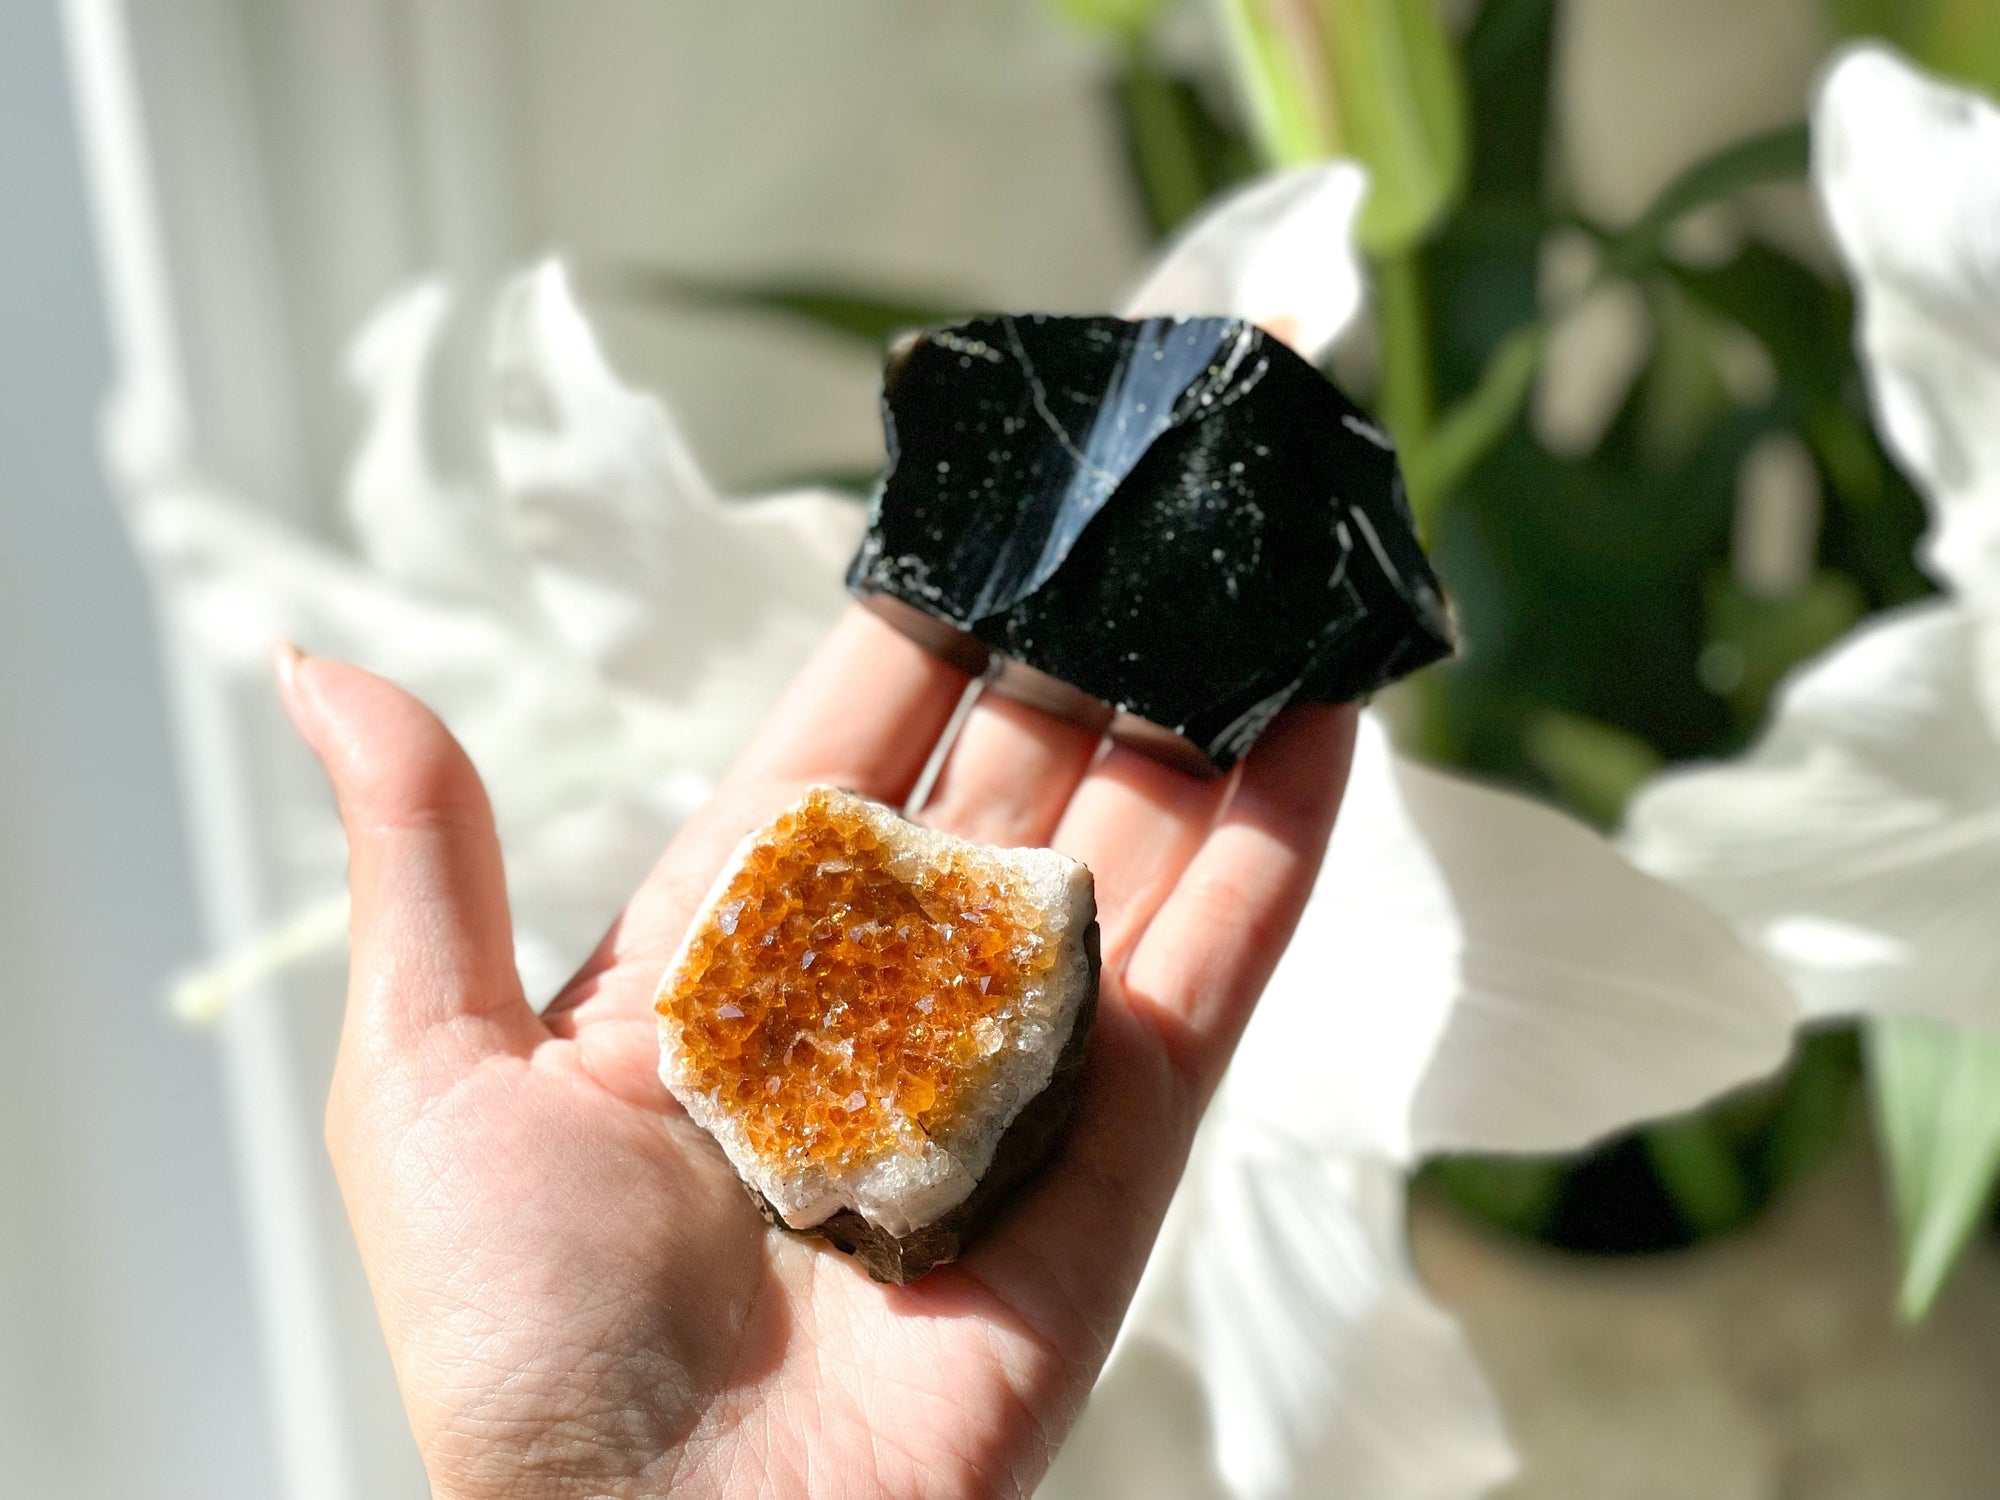 Raw Citrine Cluster & Black Obsidian Crystal Set - Manifestation and Grounding Power Duo for Prosperity and Protection"